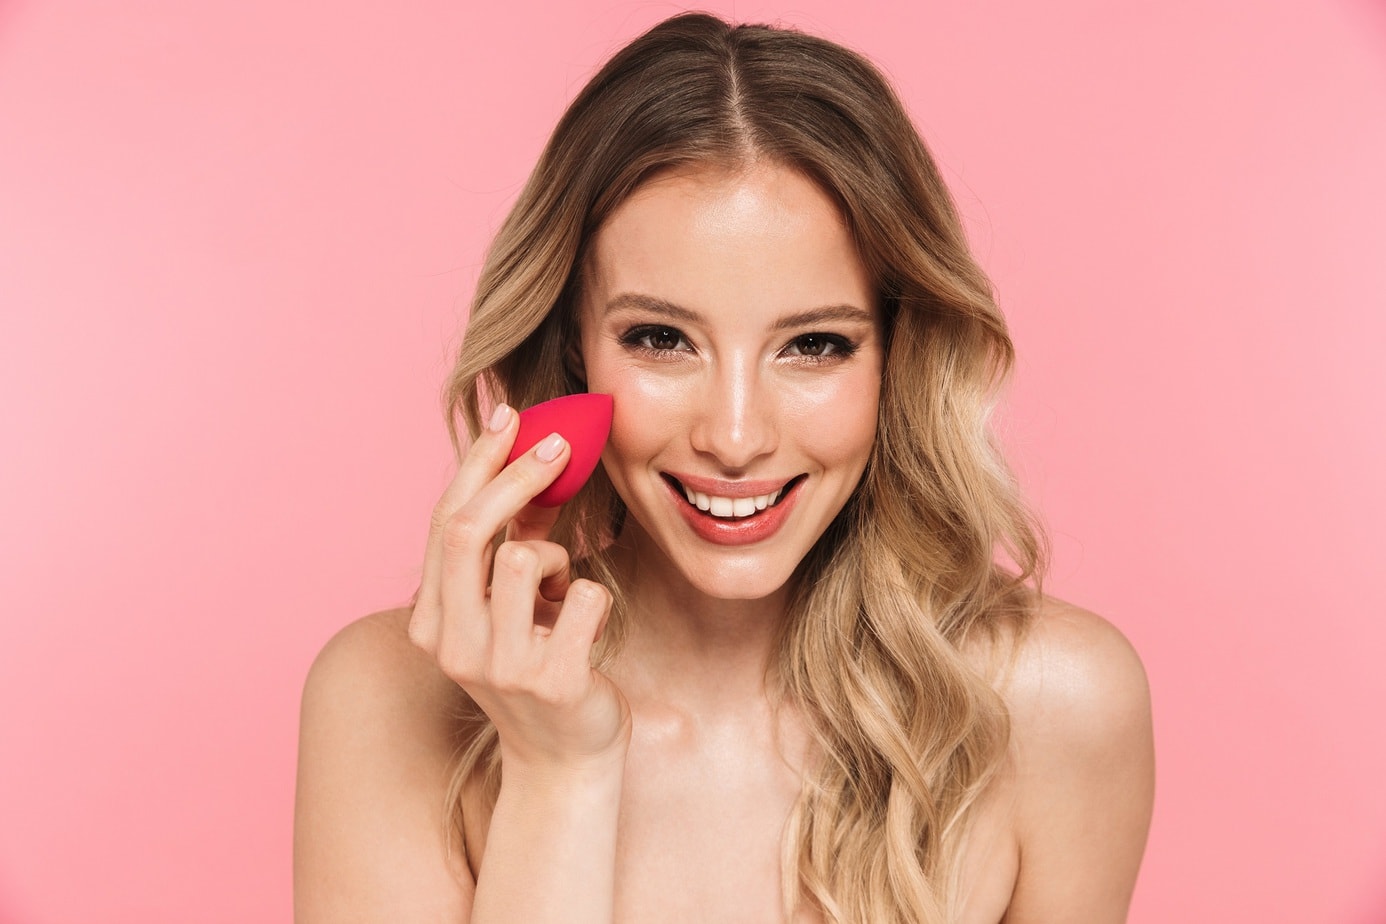 Do you know how to use a beauty blender correctly?